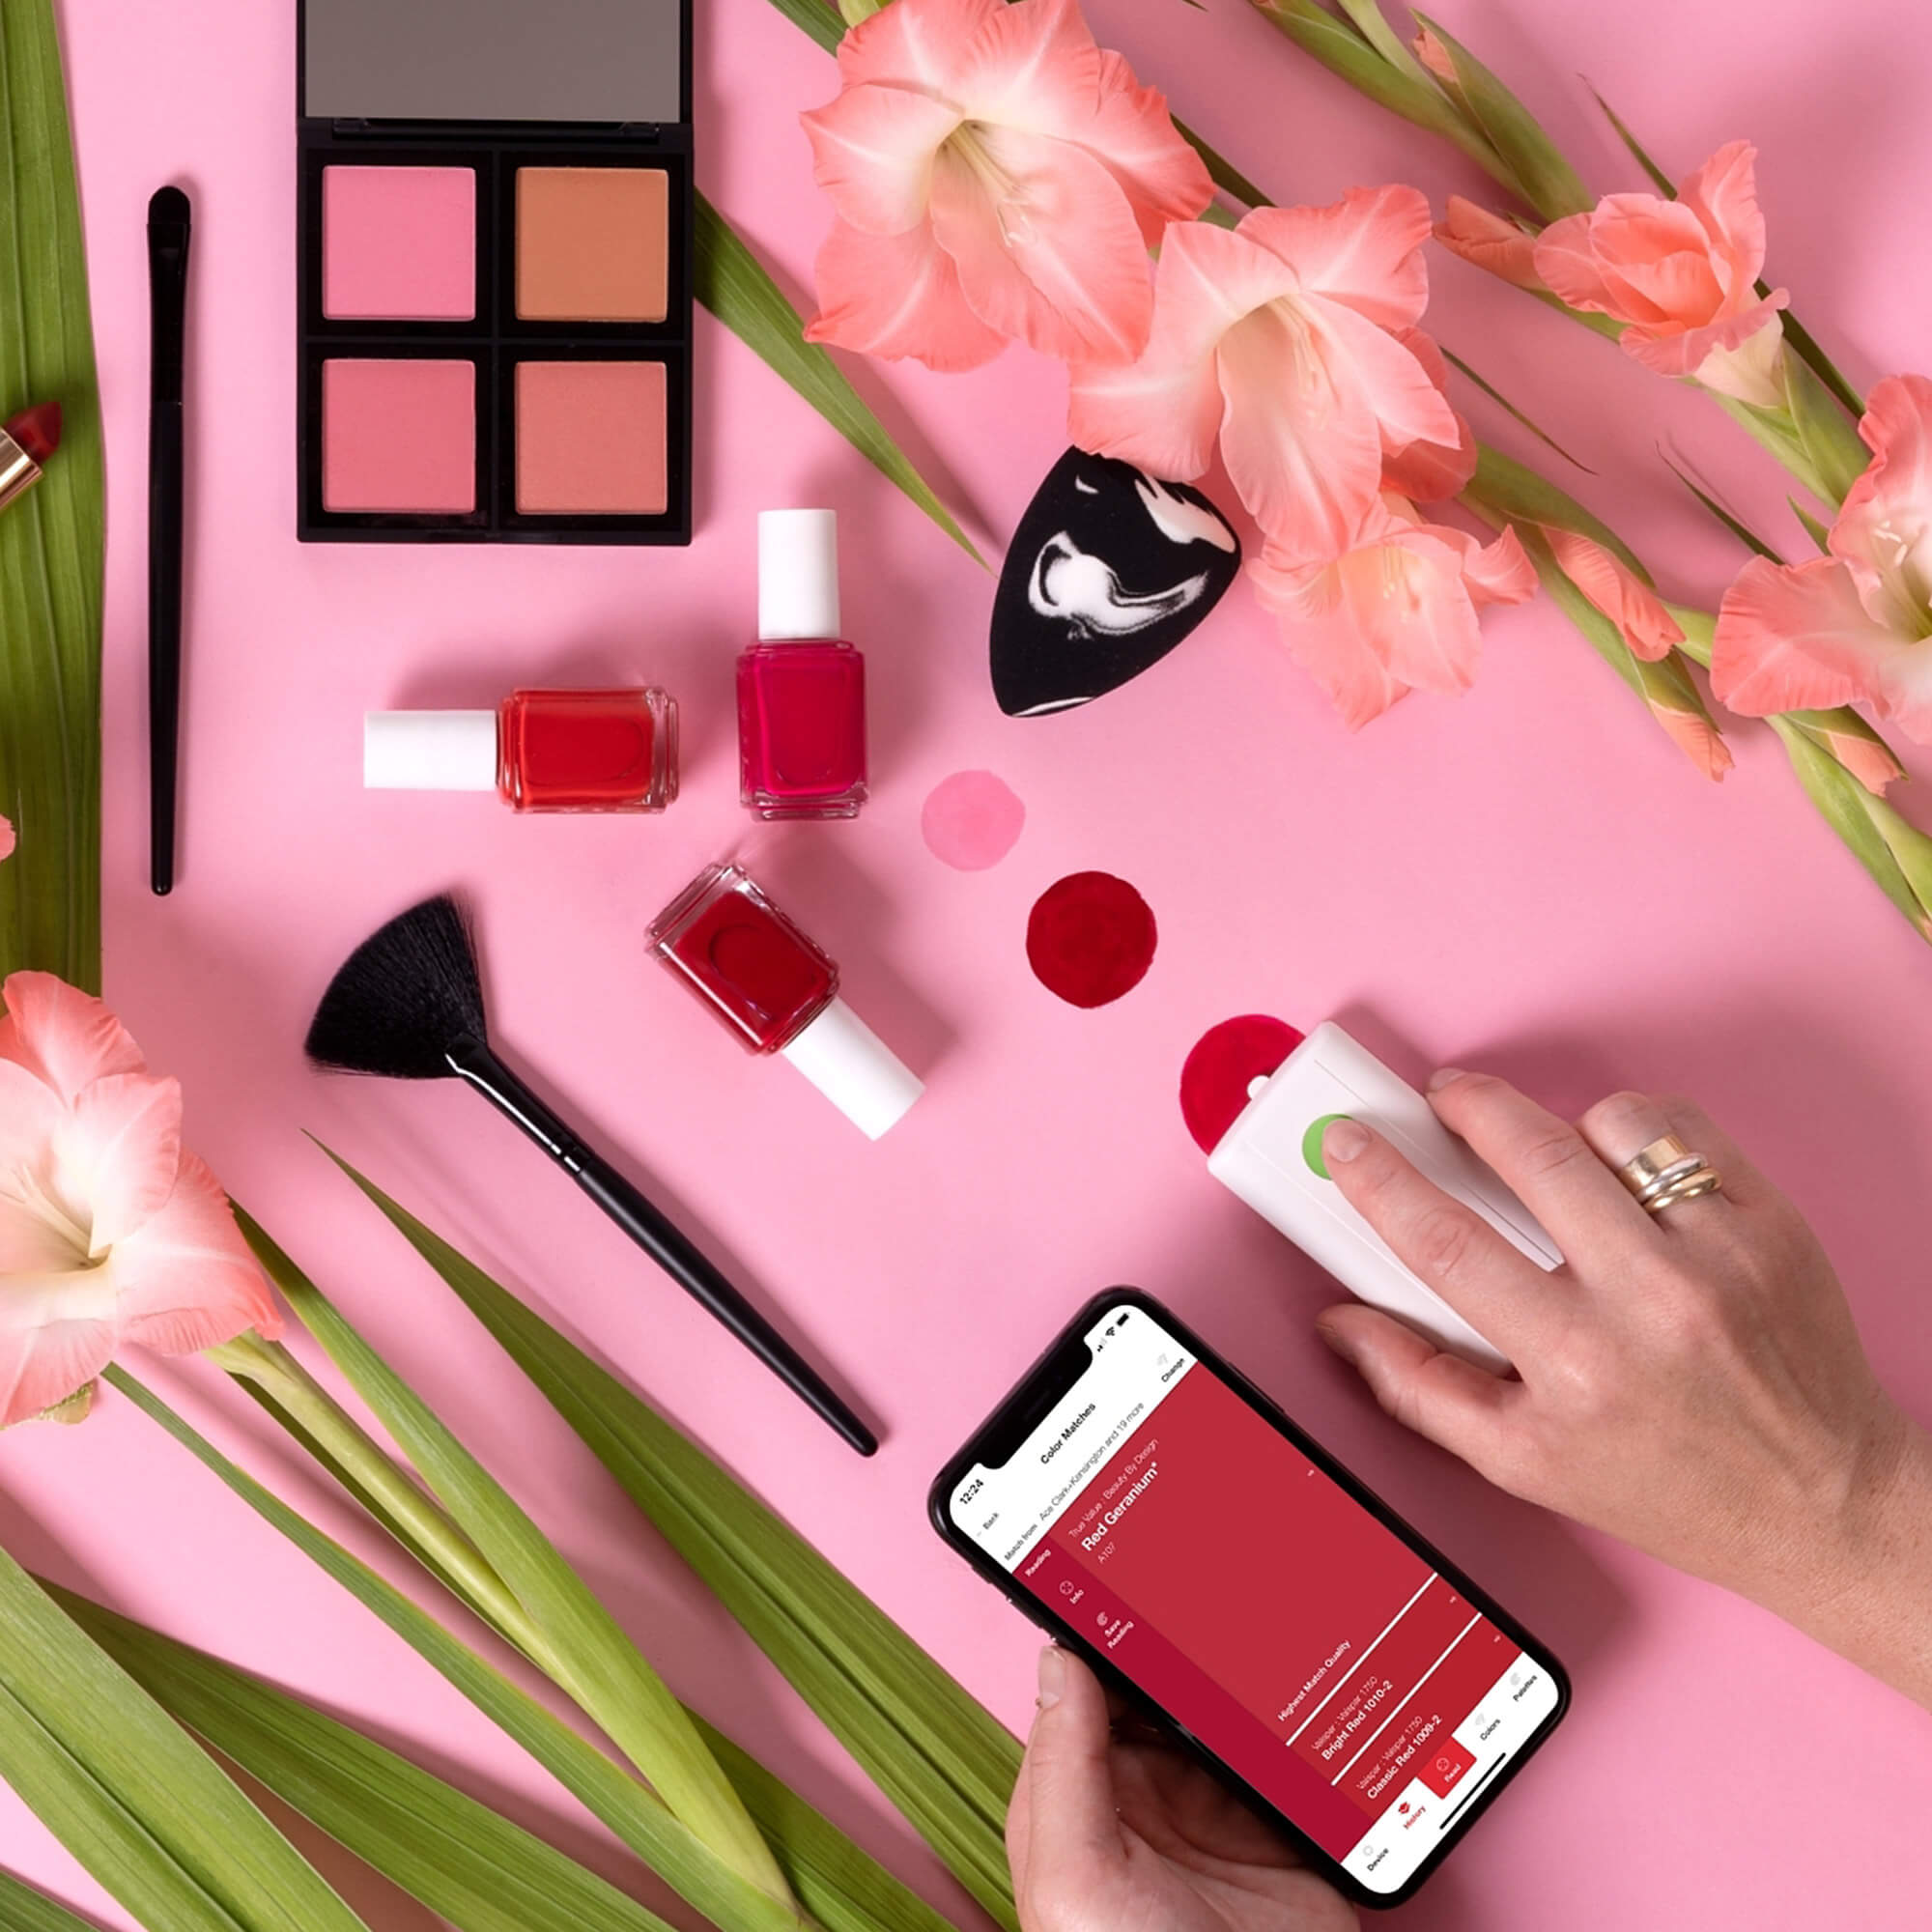 makeup, nail polish, flowers, a brush, human hand, and smartphone on a pink background